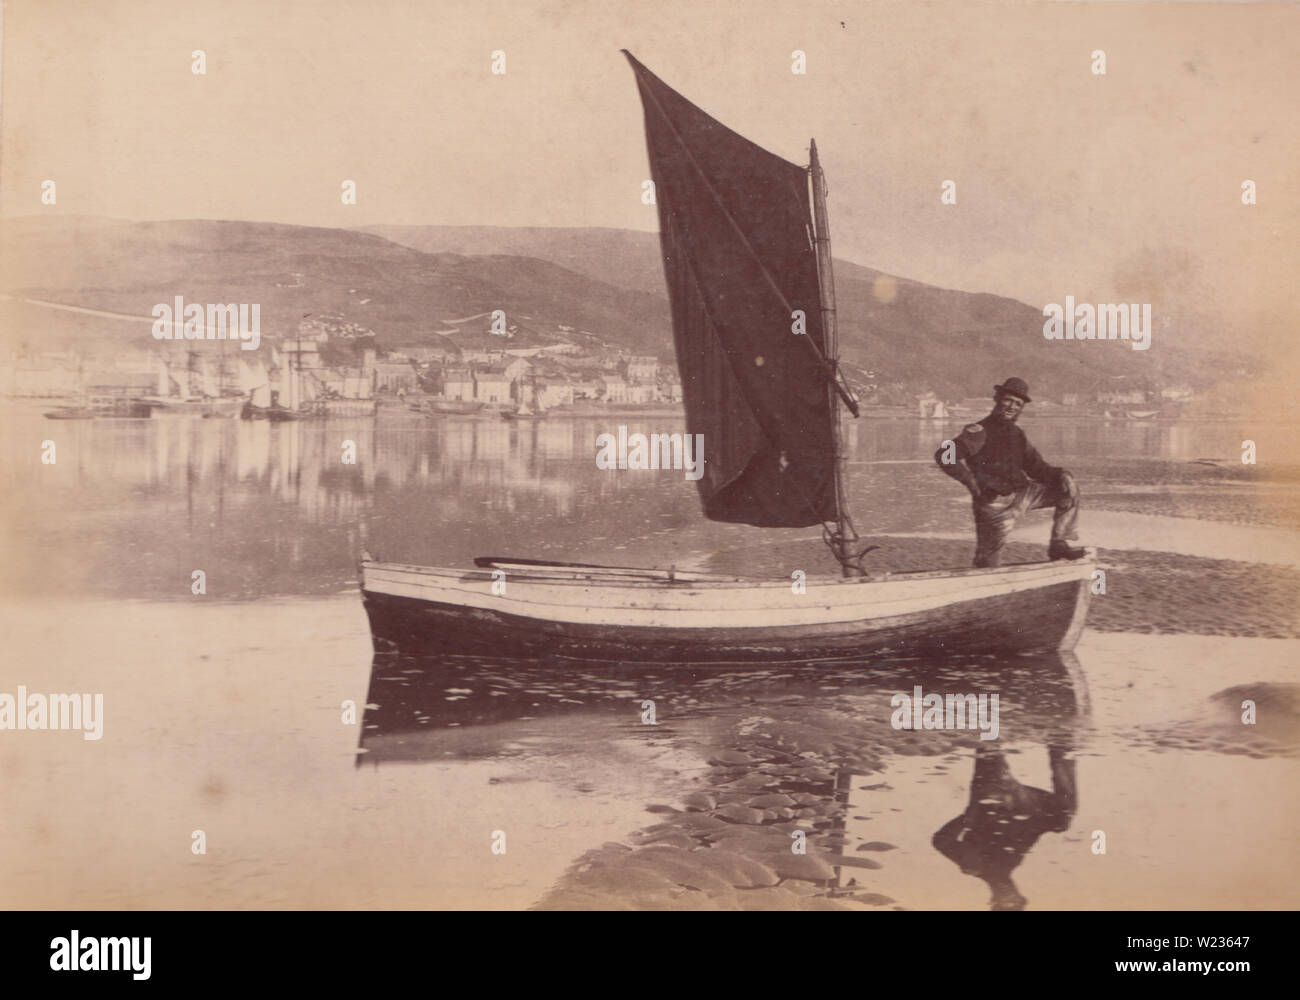 Victorian Late 1880's / Early 1890's Photograph Showing a Man Stood up in His Sailing Boat, Possibly a Fisherman. Photo Taken at Aberdovey, Wales Stock Photo